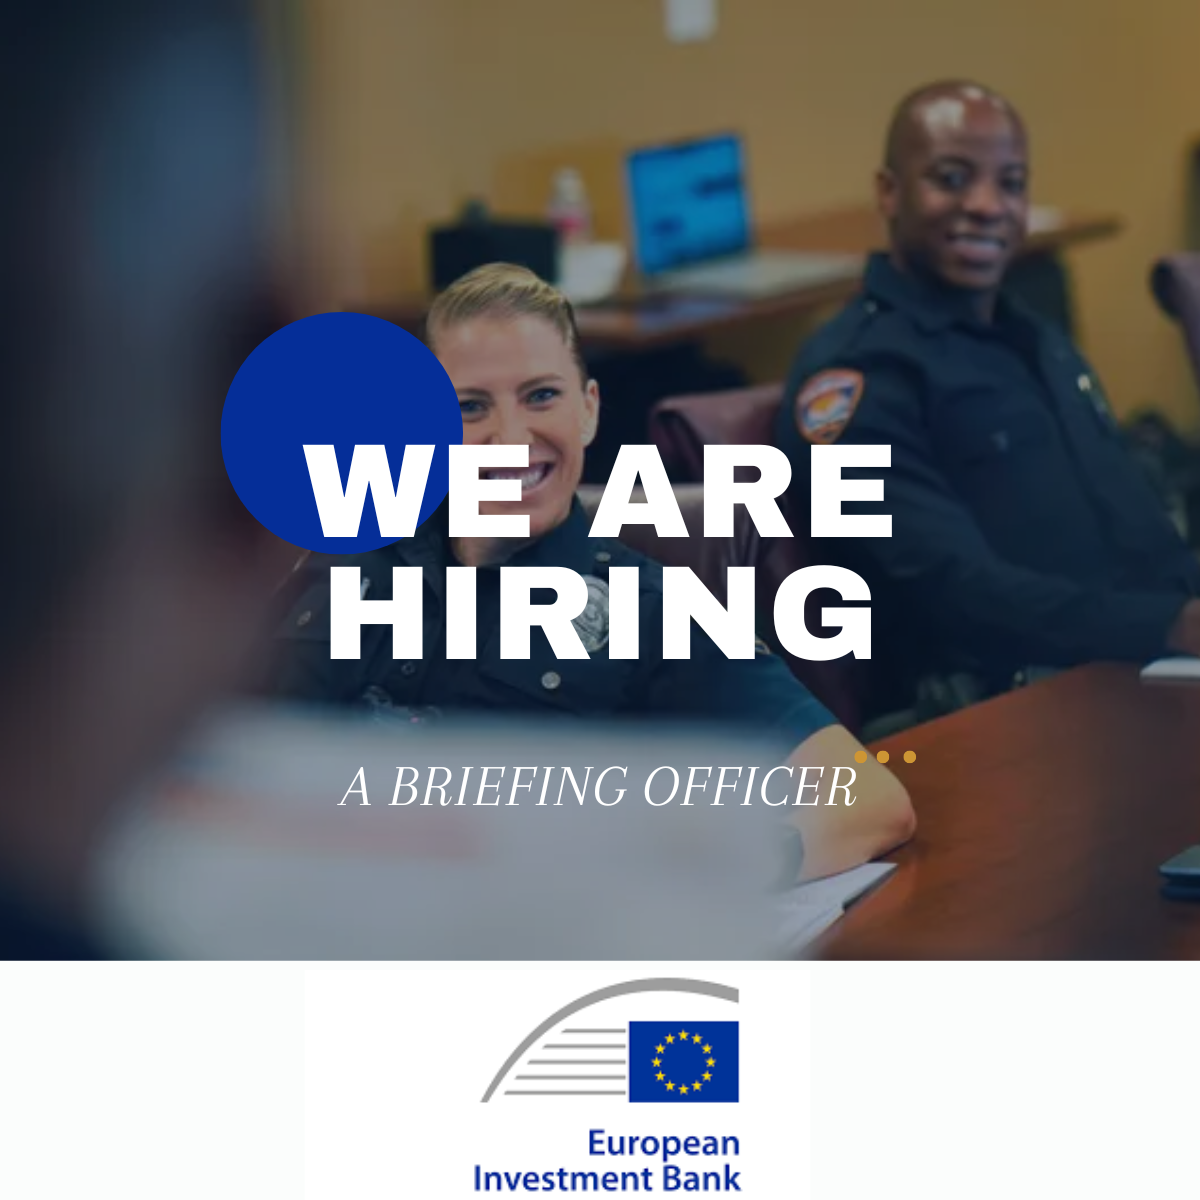 Ready to take on a new challenge? European Investment Bank is hiring a Briefing Officer. Submit your application today!